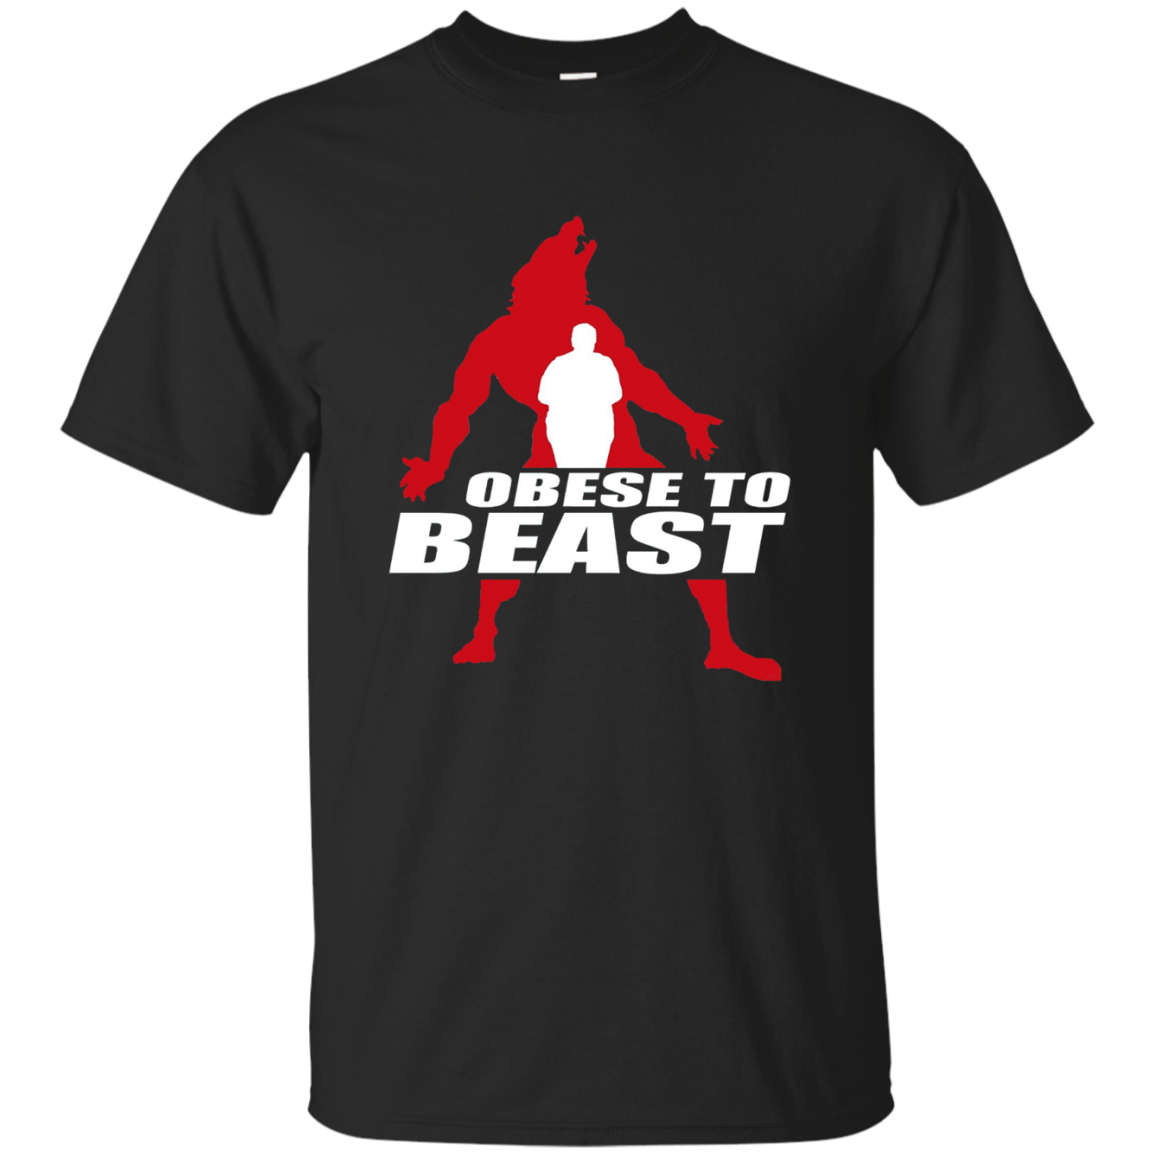 Buy Obese To Beast Shirt Weight Loss Obese Yoga Tee